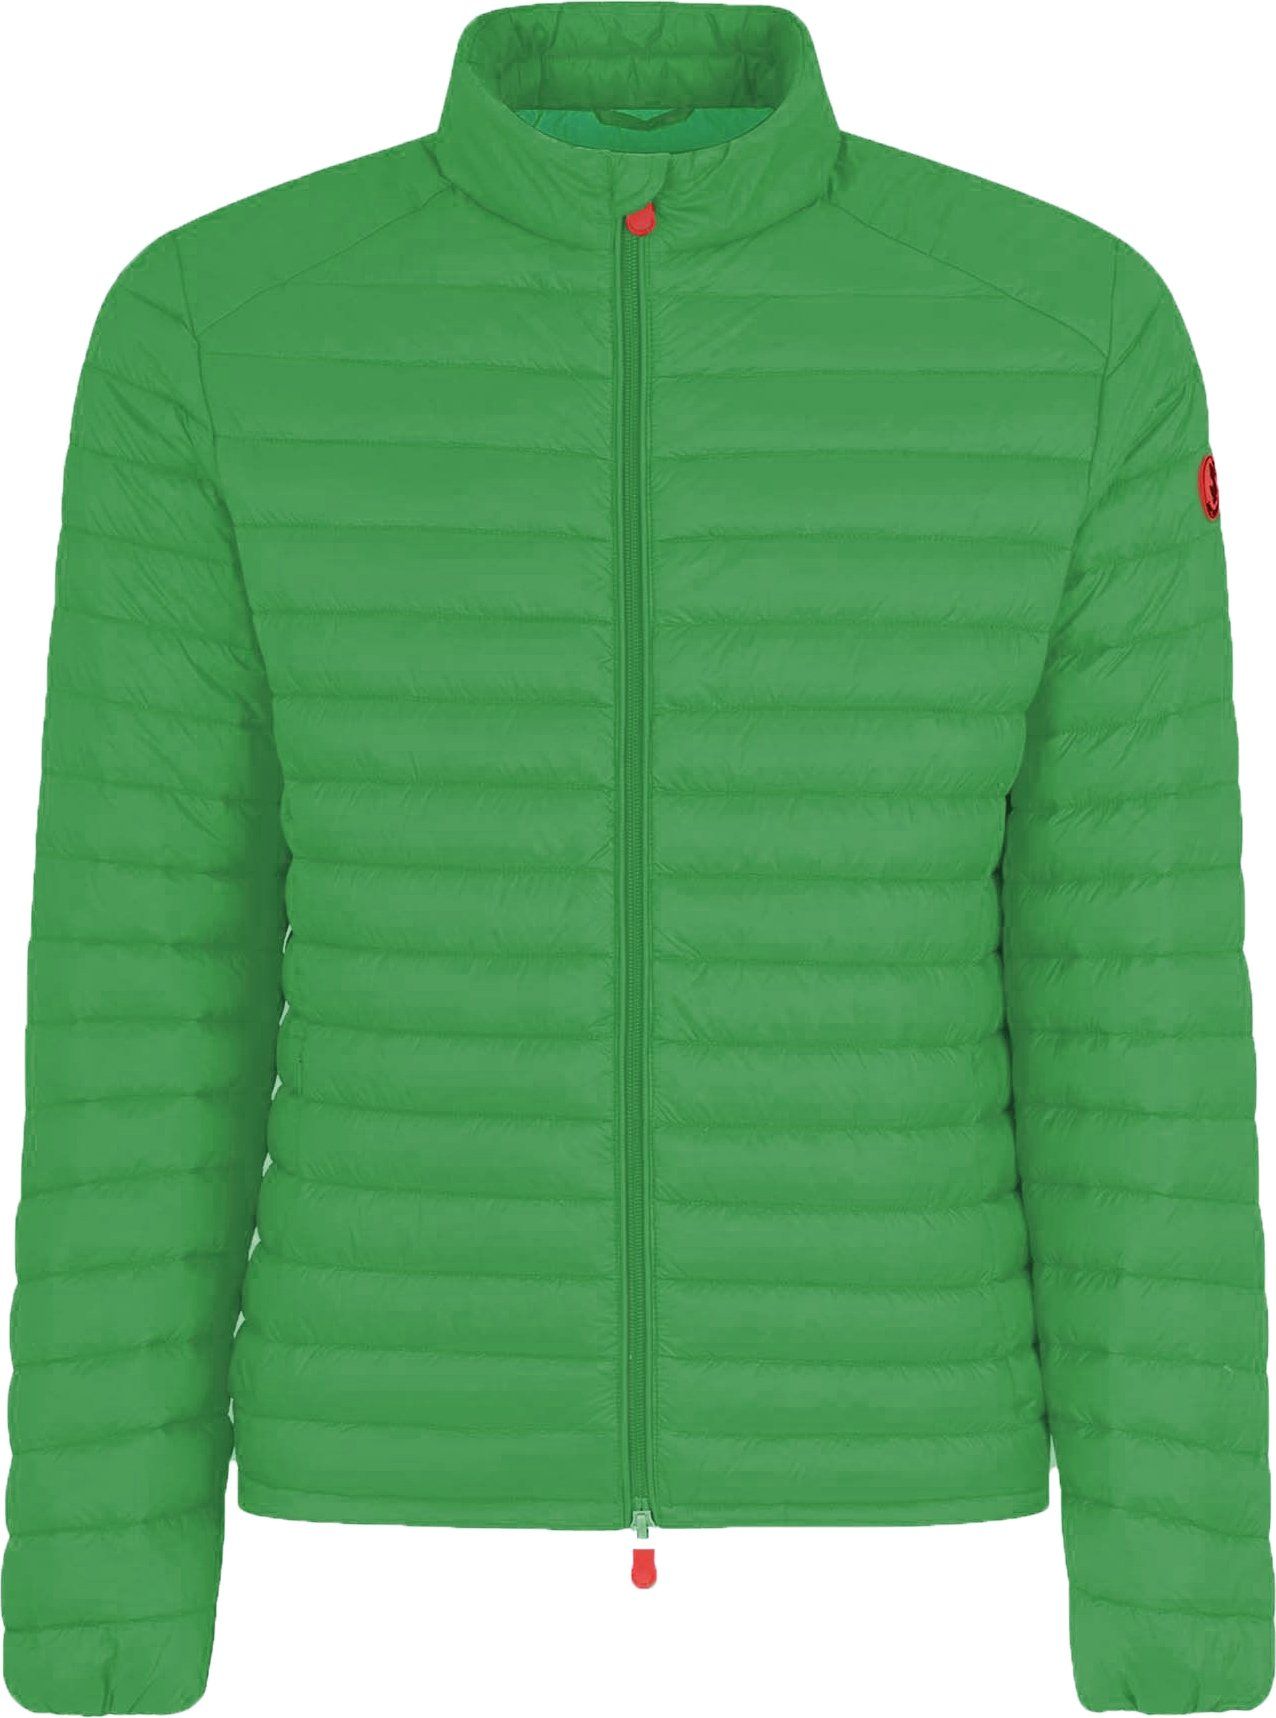 Save The Duck Jacket Giga Alexander Green size M